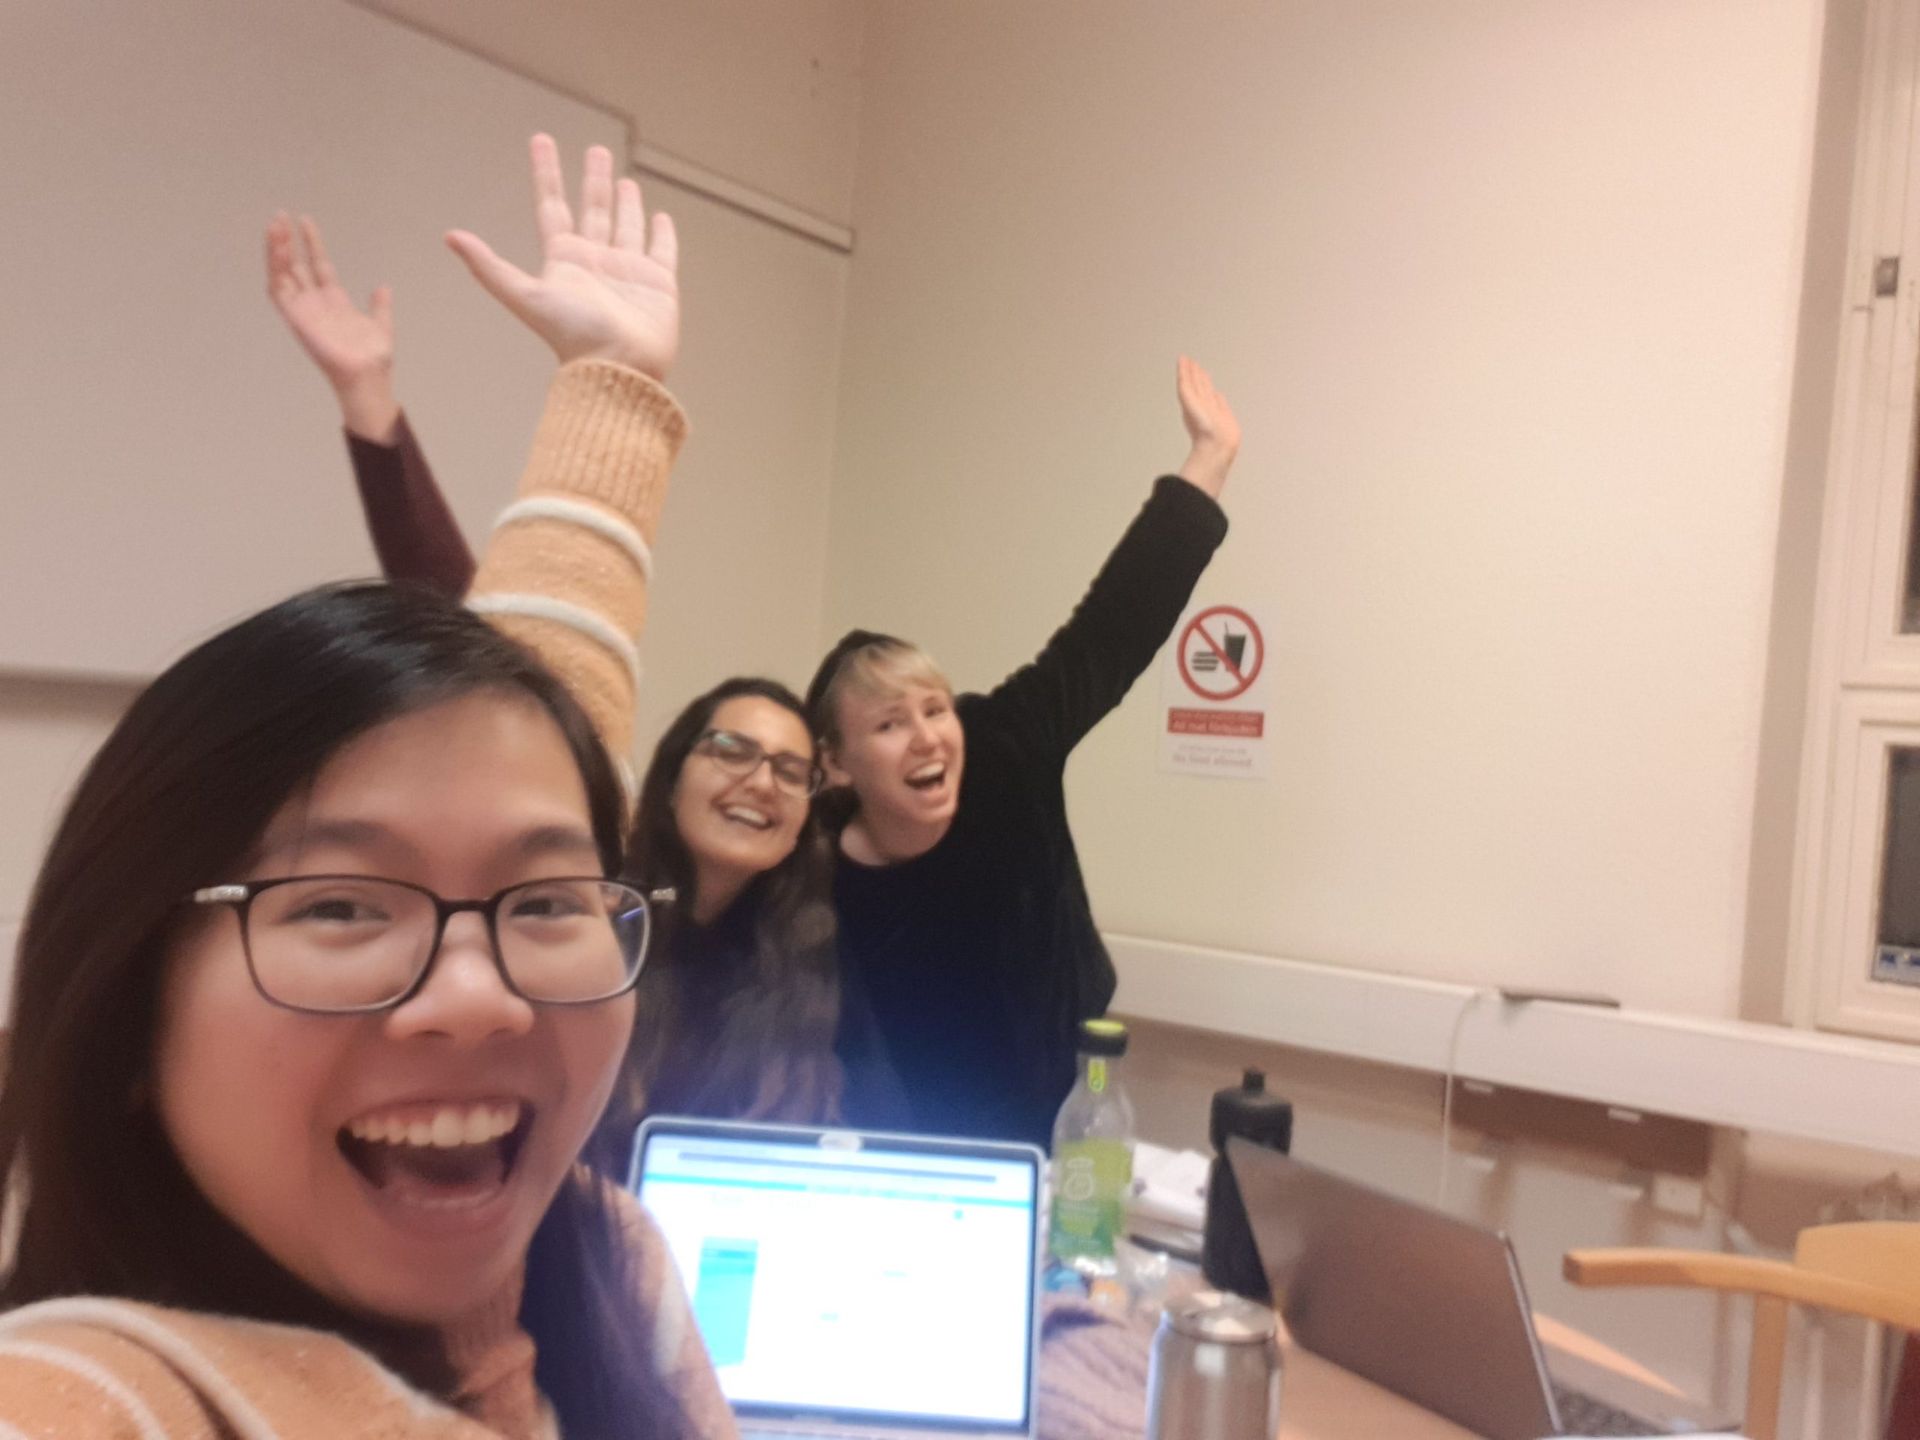 Three young ladies throw hands in the air to celebrate the end of a successful group project